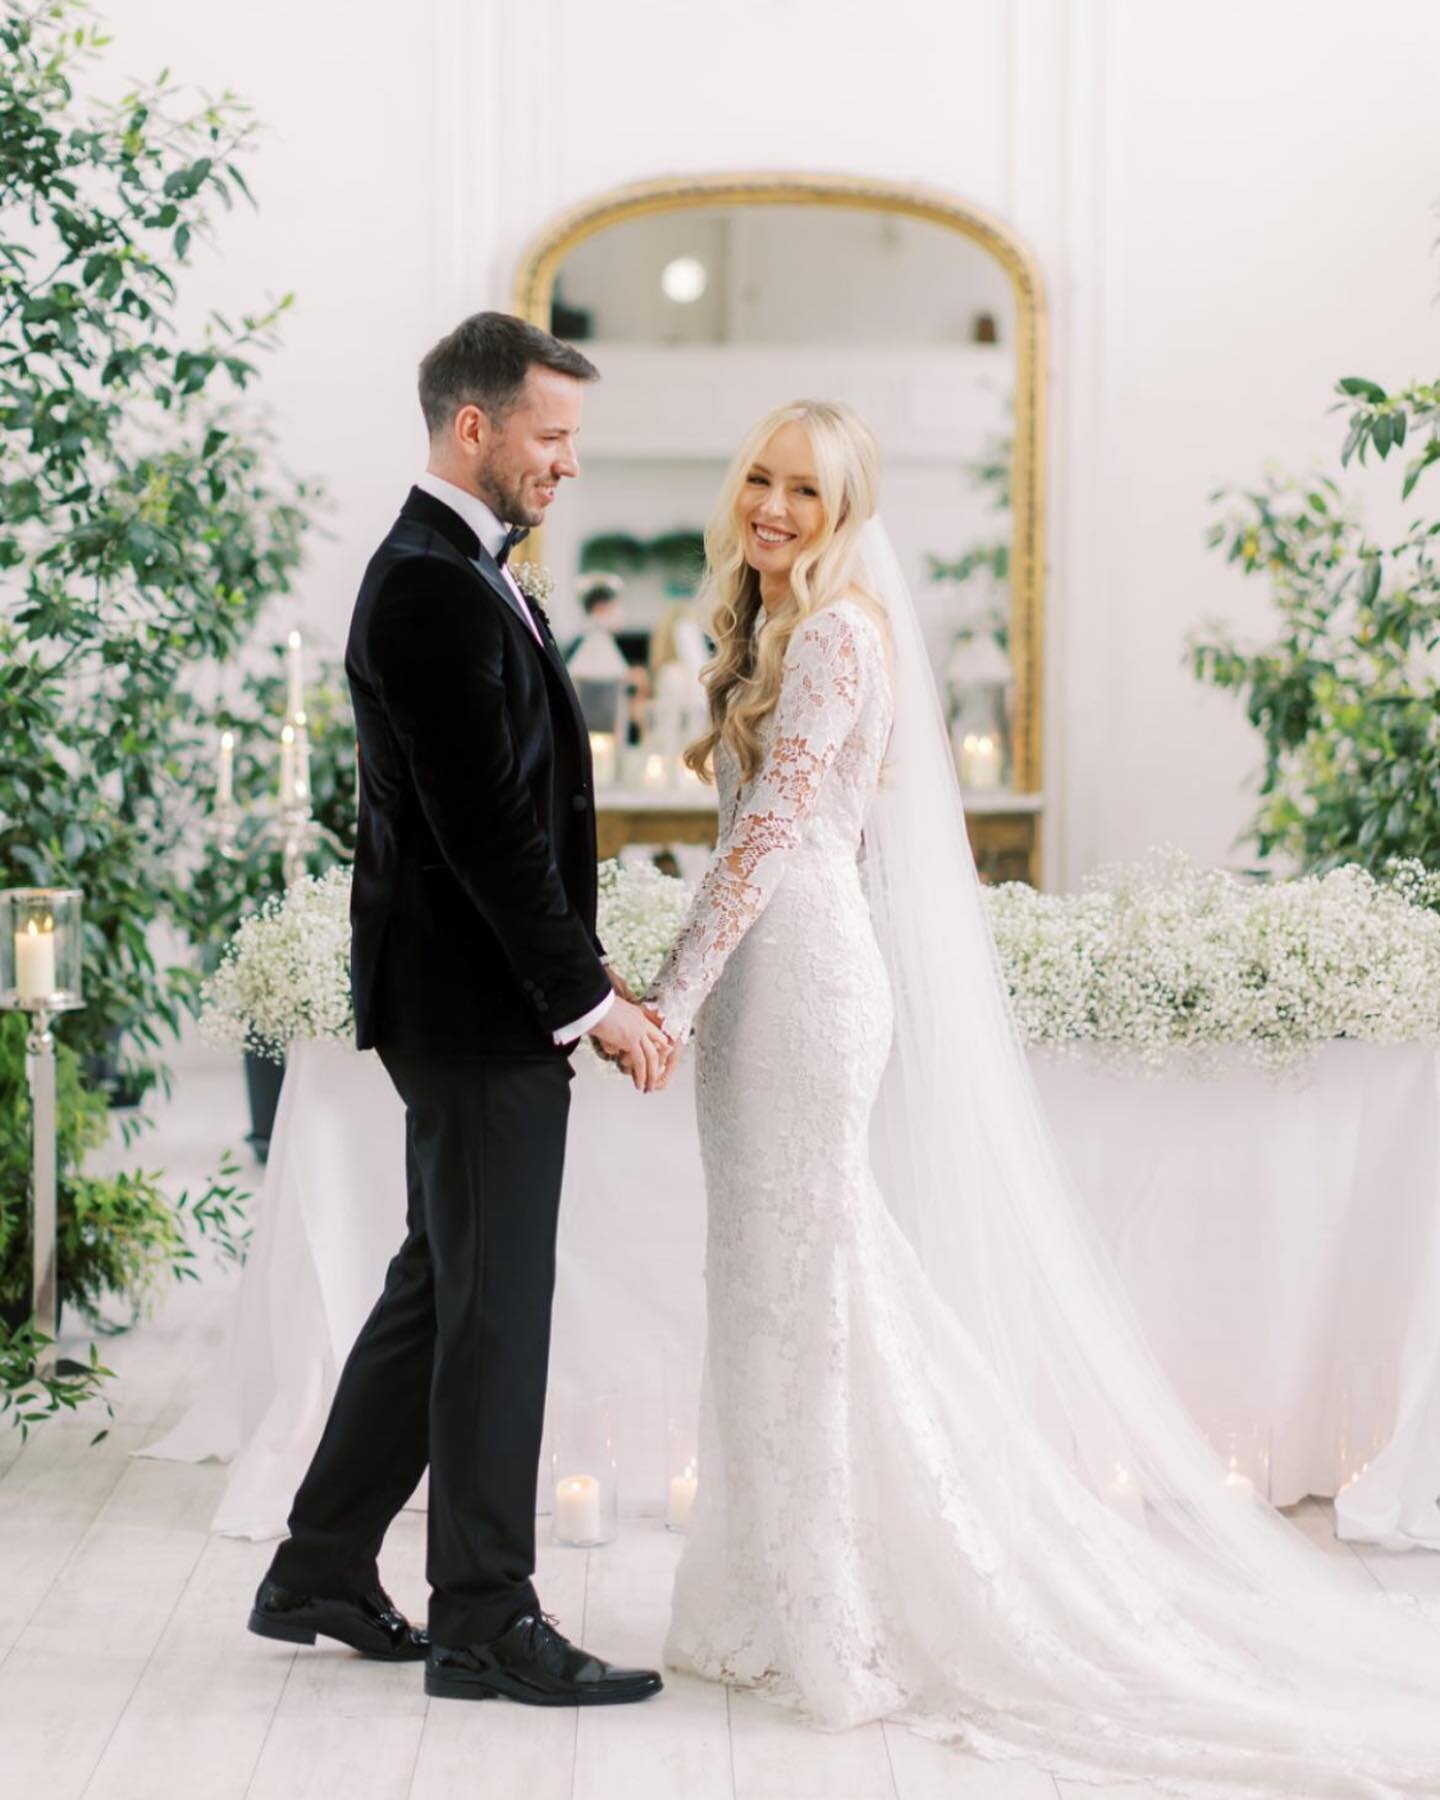 Hazel &amp; Andrew 🕊

All white gypsophila with candlelight and pops of black velvet for this stylish pair in Gloster House 🤍. An elegant wedding day captured so beautifully by @niamhsmith.weddings.
Recently featured in @onefabday.

@gloster_house 